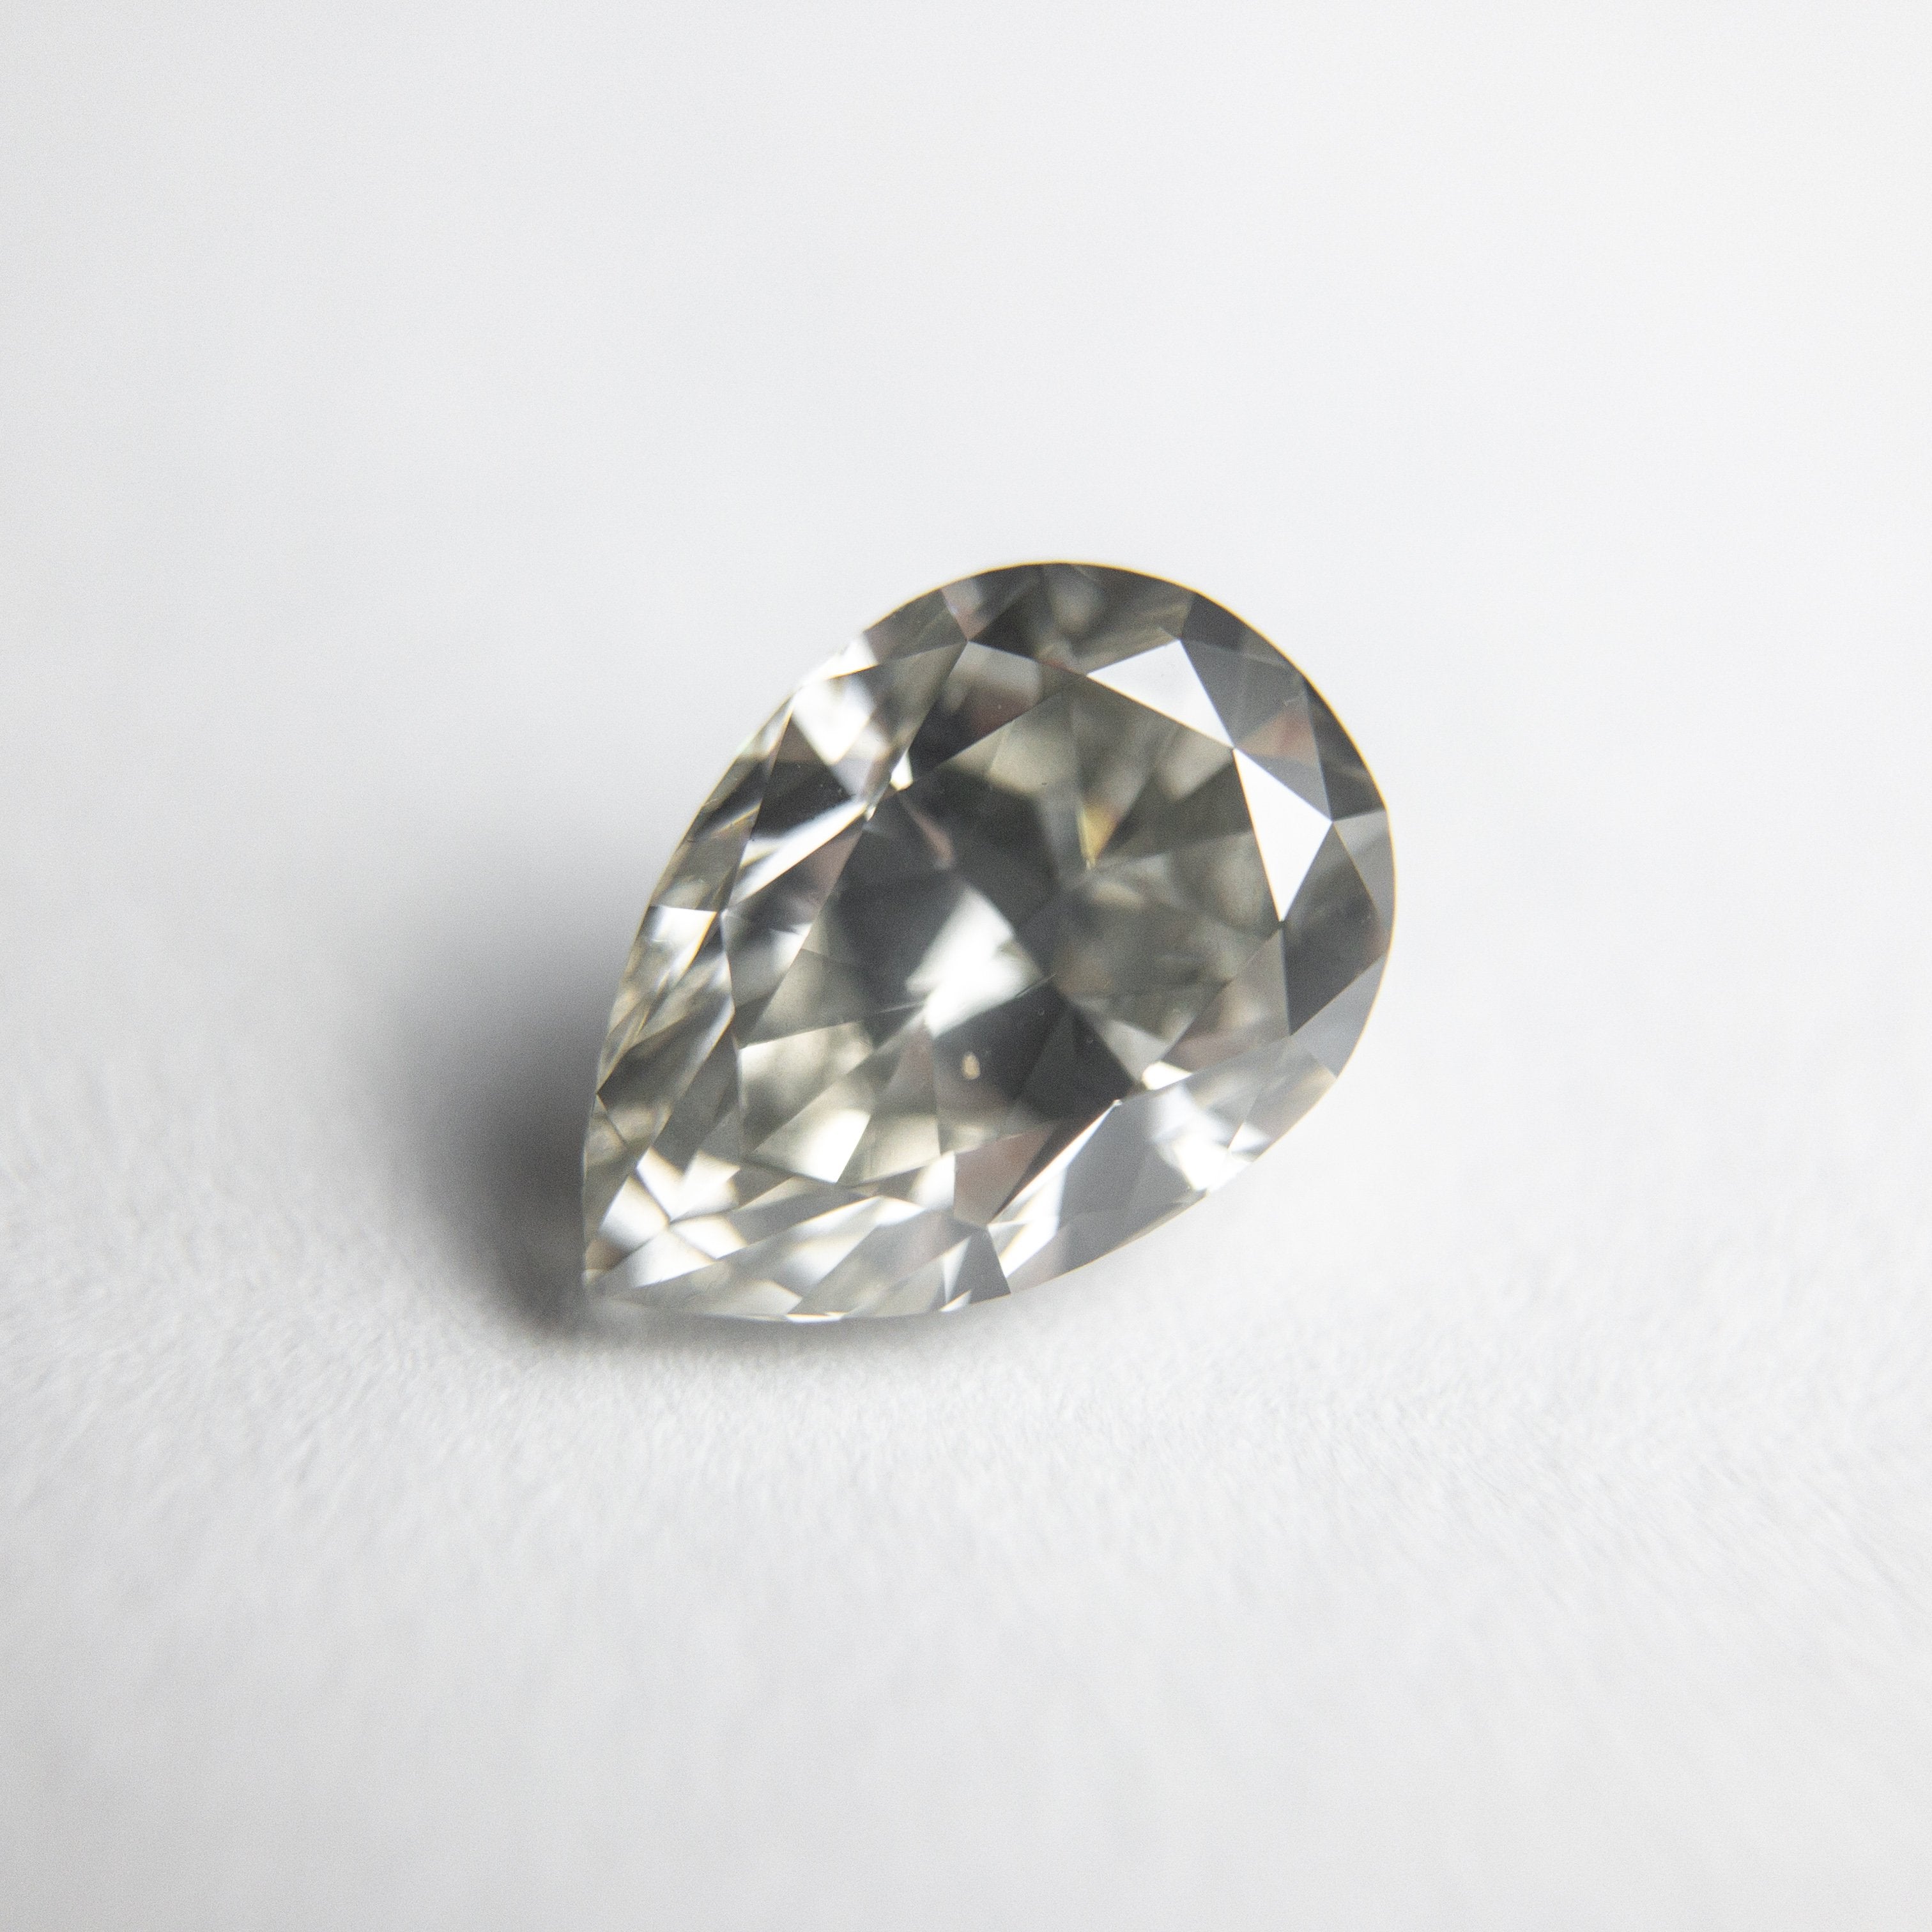 1.18ct 7.82x5.46x4.07mm GIA SI1 Fancy Grey Pear Brilliant 18171-01 hold d853